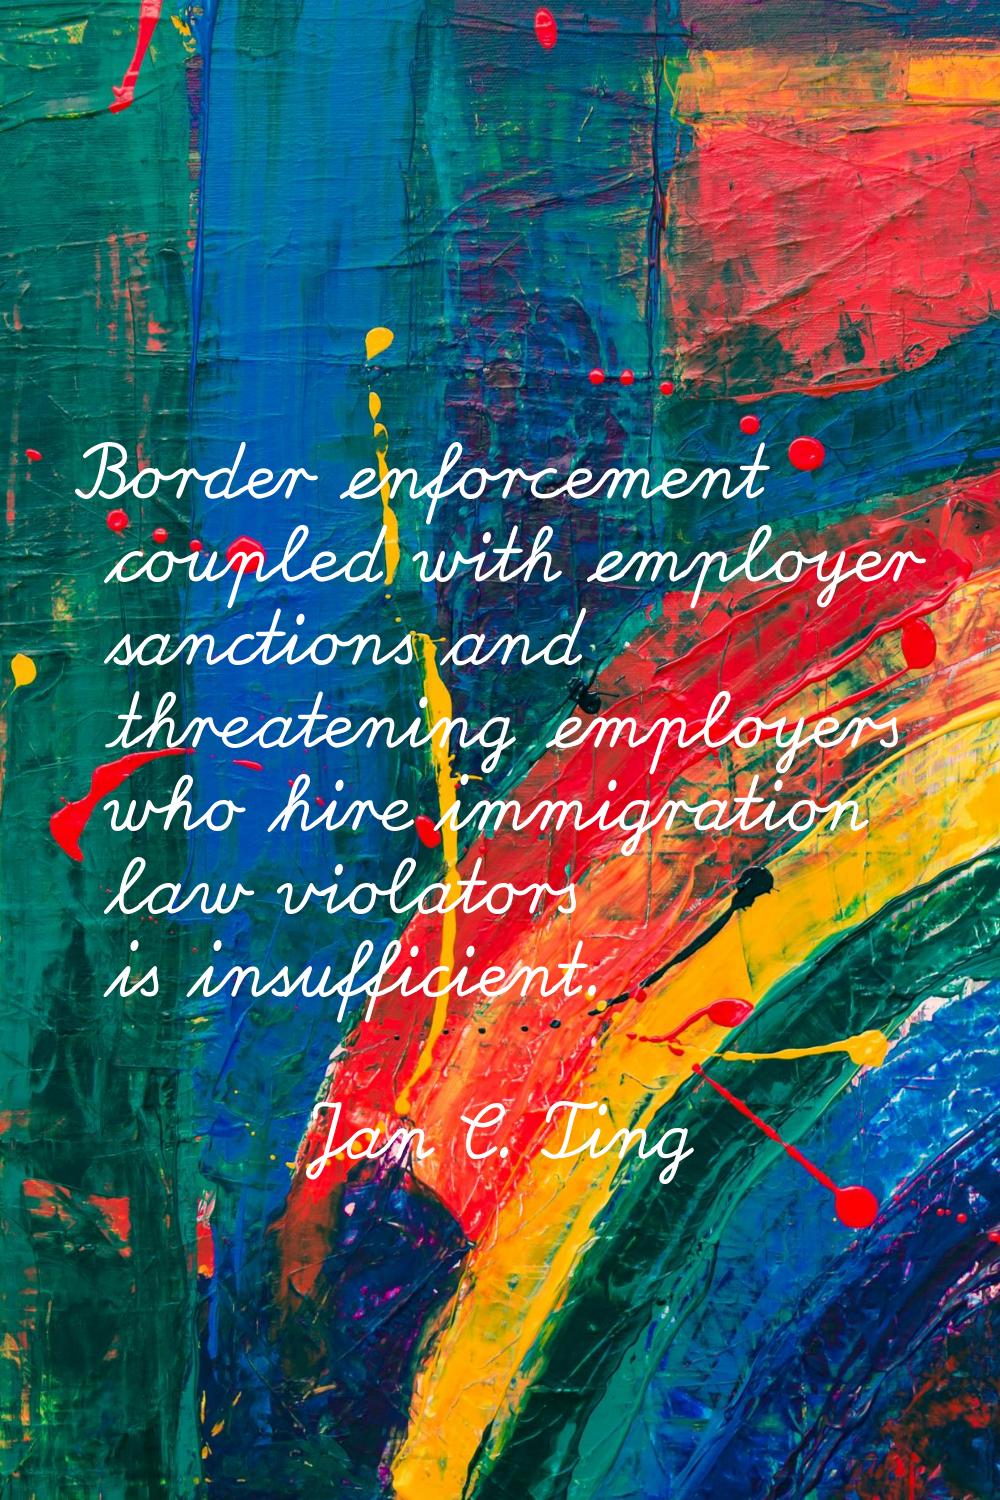 Border enforcement coupled with employer sanctions and threatening employers who hire immigration l